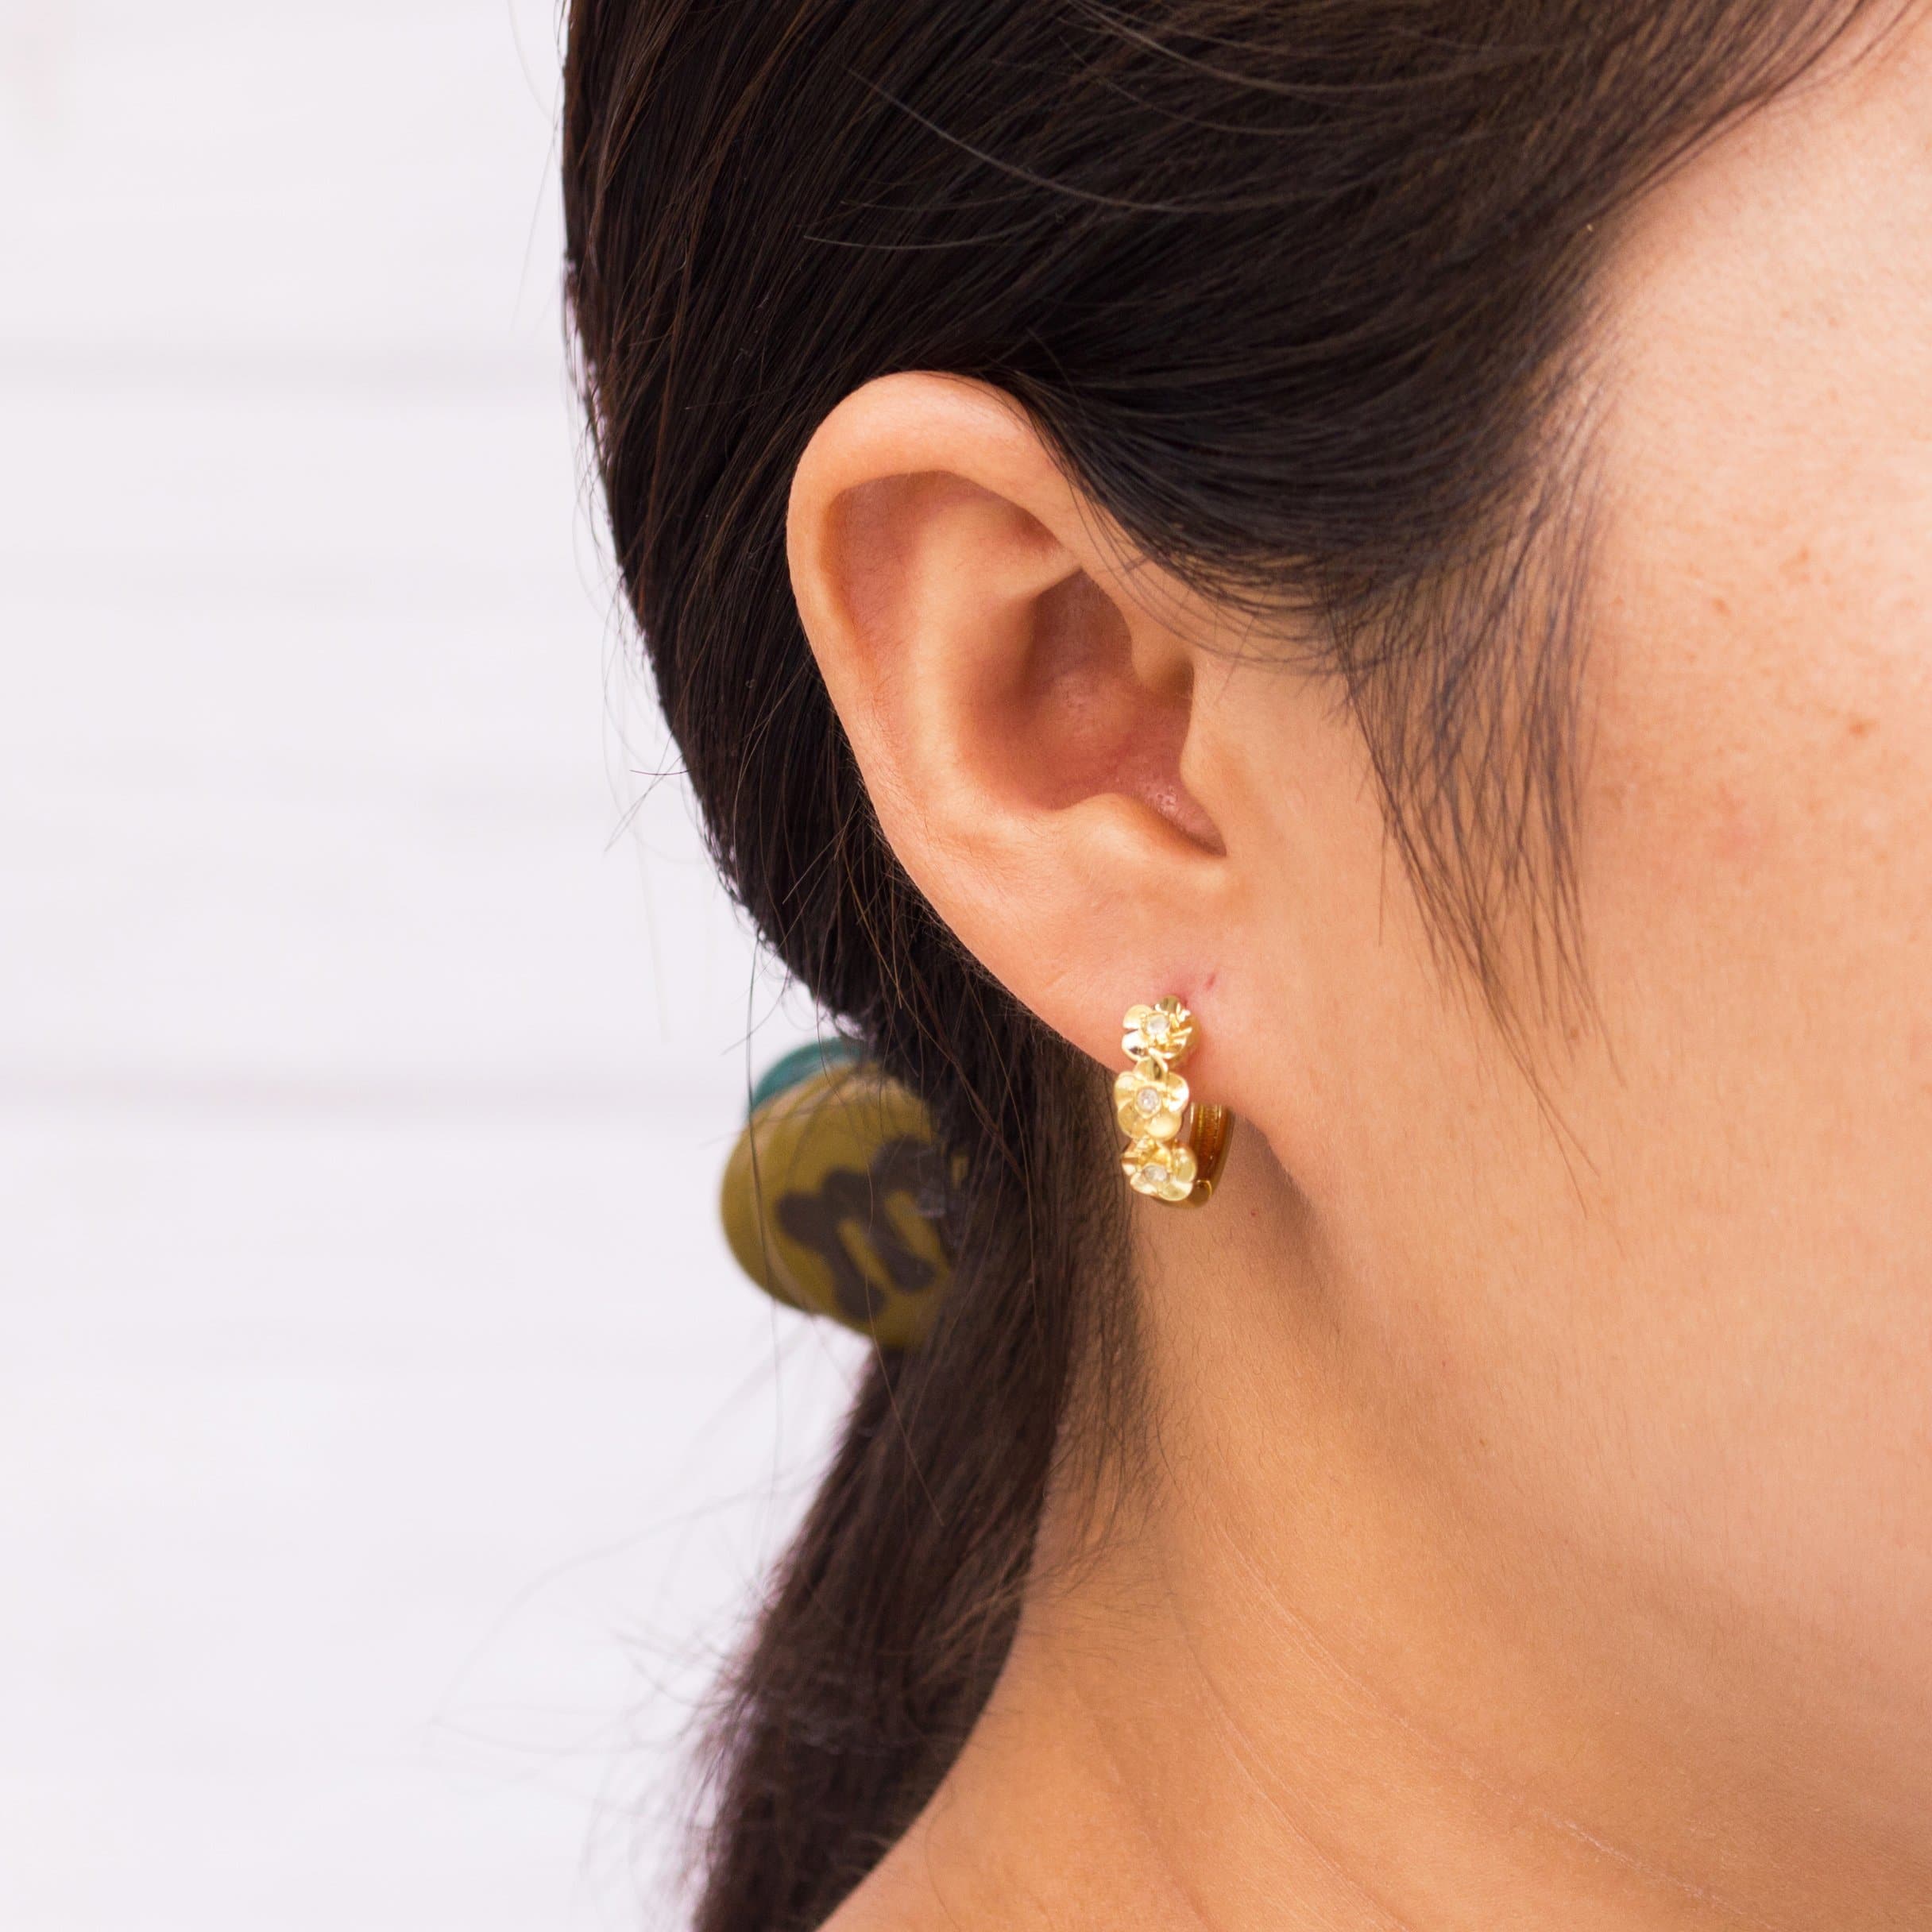 Gold Plated Flower Hoop Earrings Created with Zircondia® Crystals